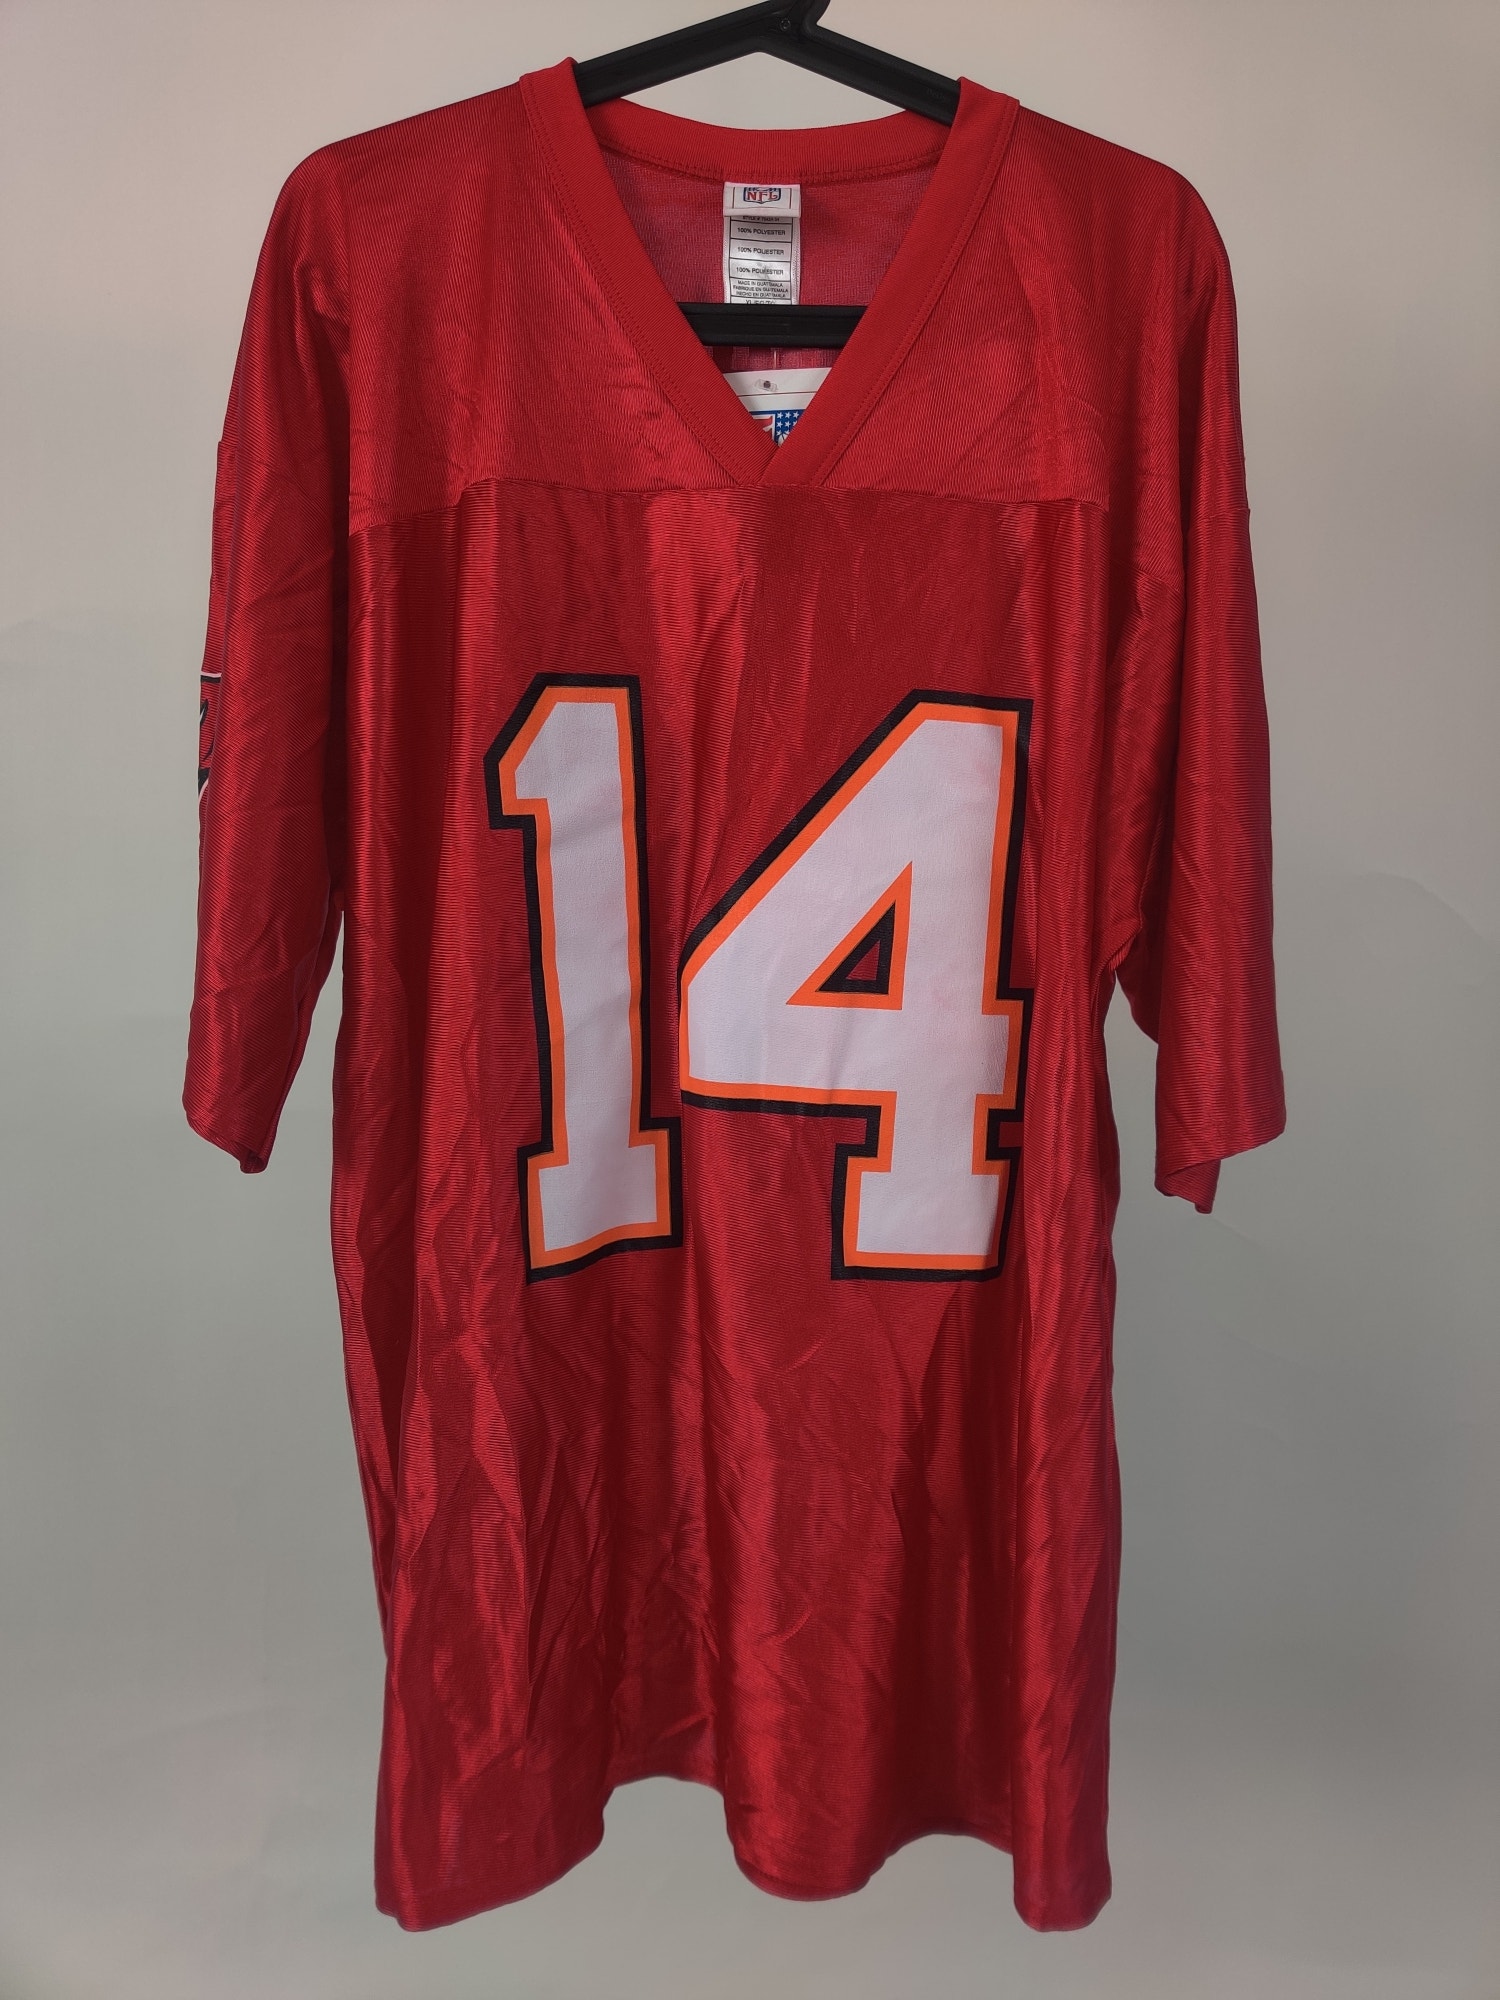 (V)NEW Tampa Bay Buccaneers B. Johnson #14 NFL Jersey Men’s XL - Picture 1 of 9